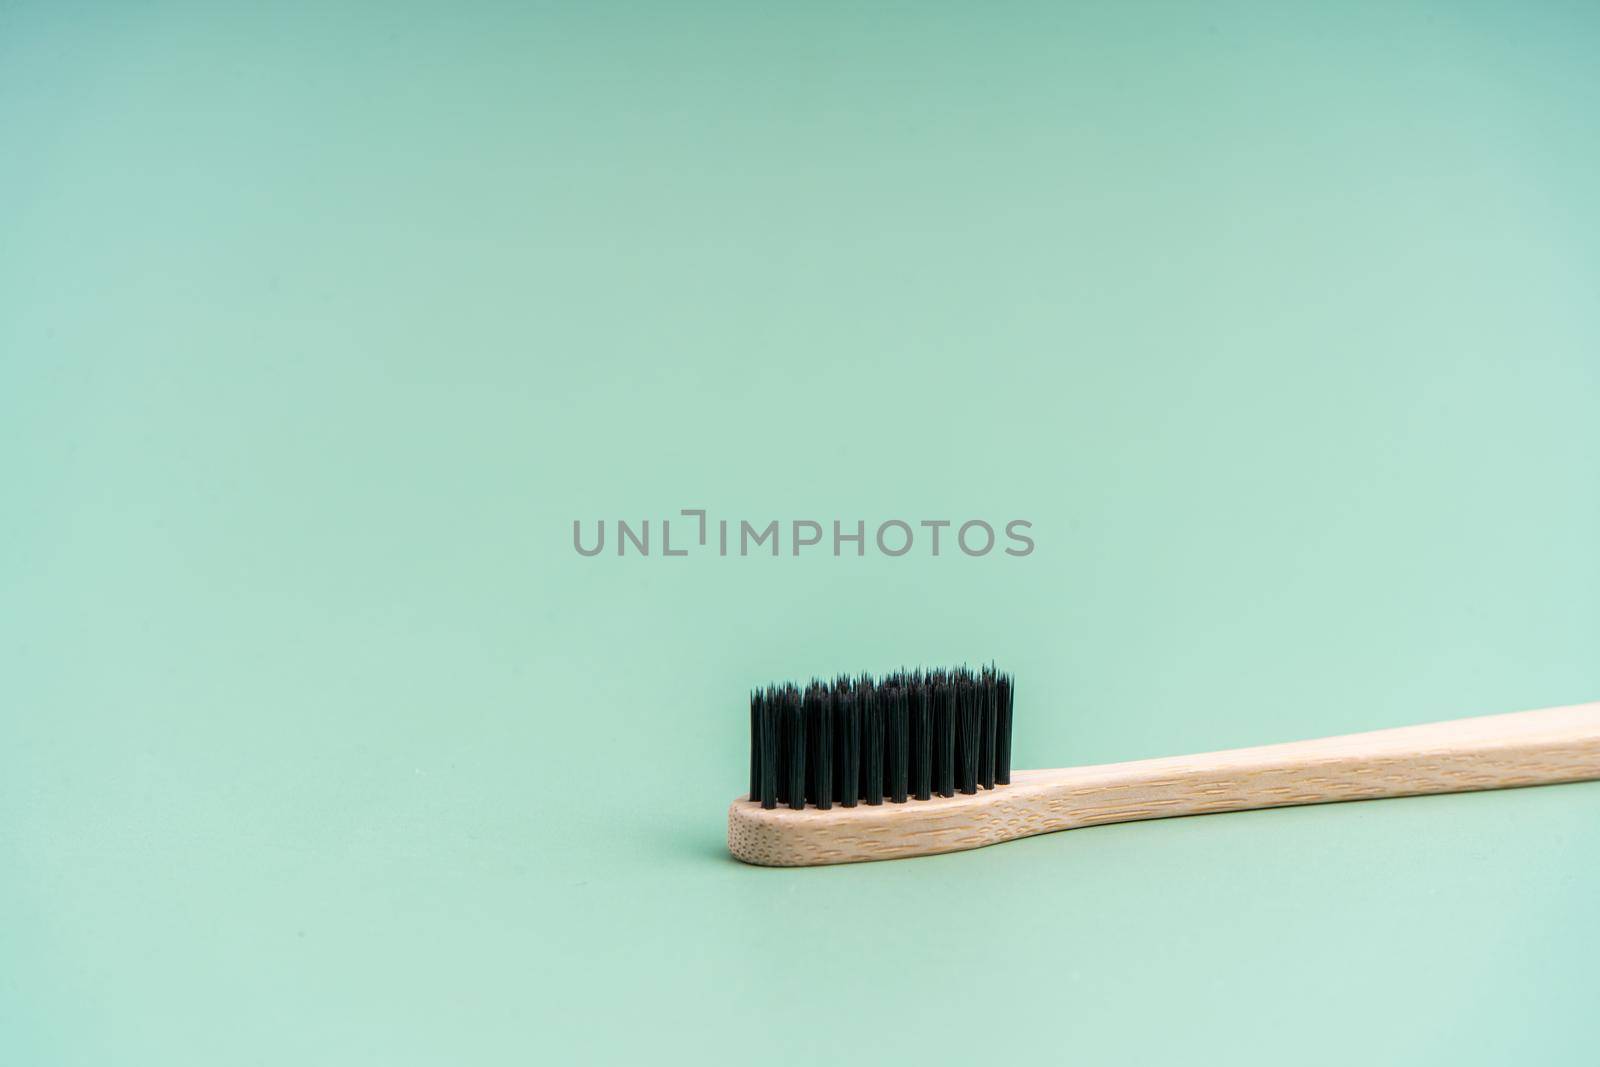 Eco friendly antibacterial bamboo wood toothbrush with black bristles on light green background. Taking care of the environment in trend.